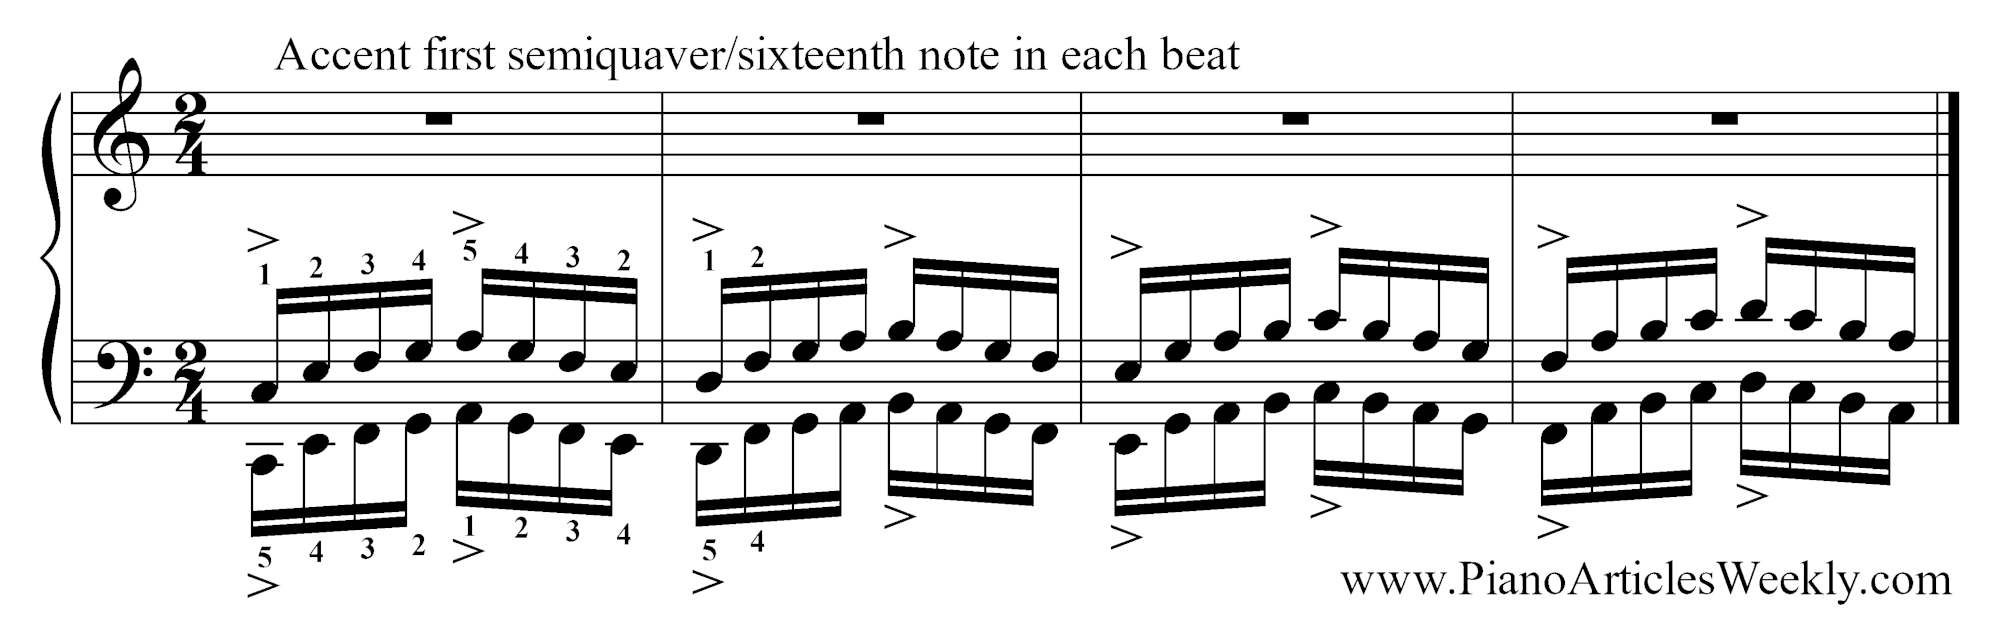 Hanon-Exercise-accent-first-semiquaver_sixteenth-note-in-each